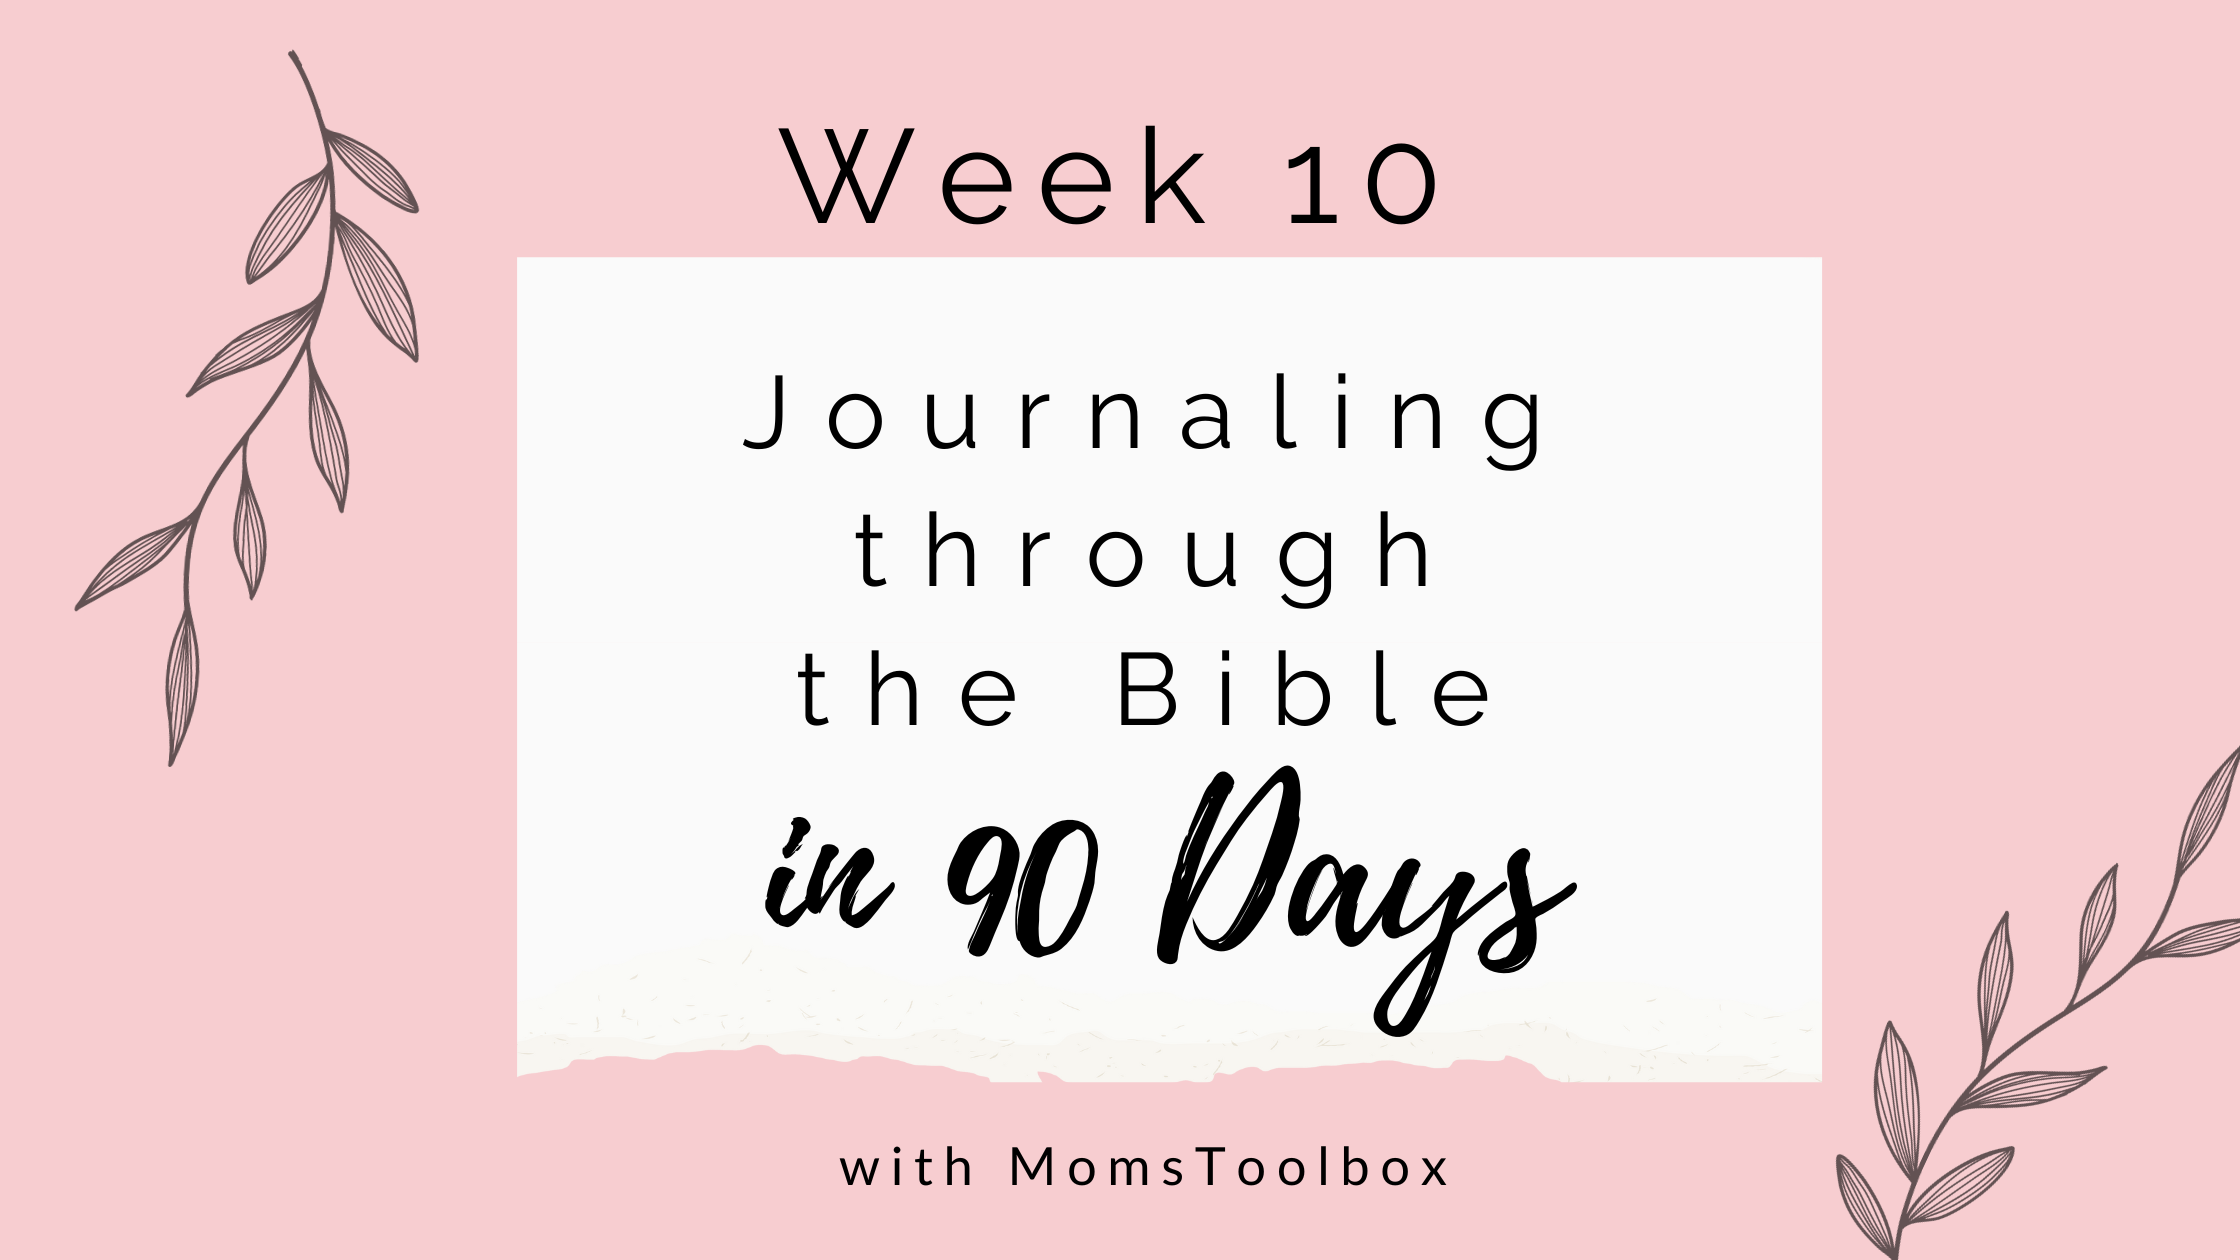 Journaling through the Bible in 90 days Week 10! (and a Texas bluebonnet pic!)